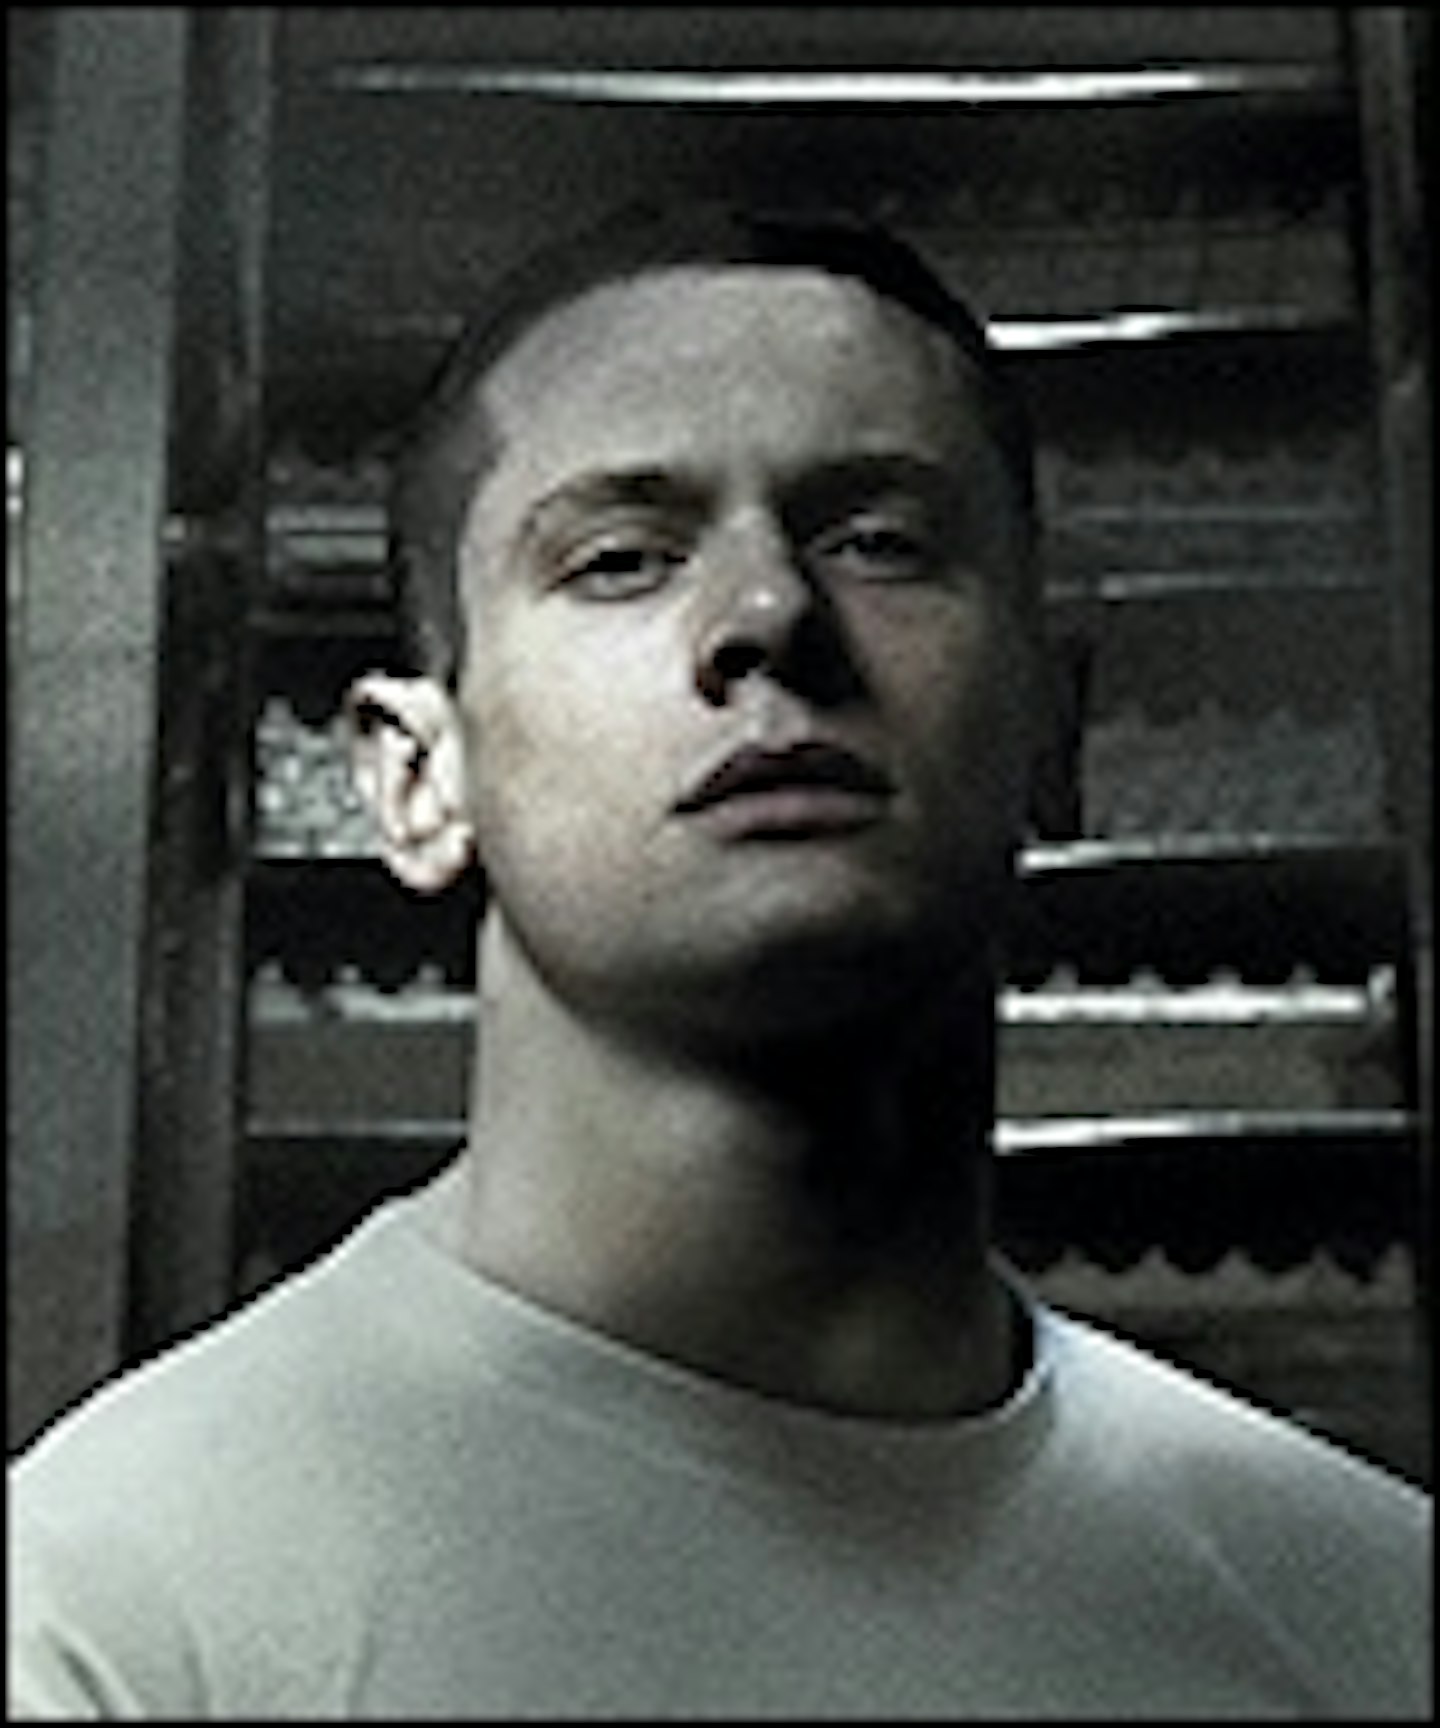 New Starred Up Trailer Thumps In